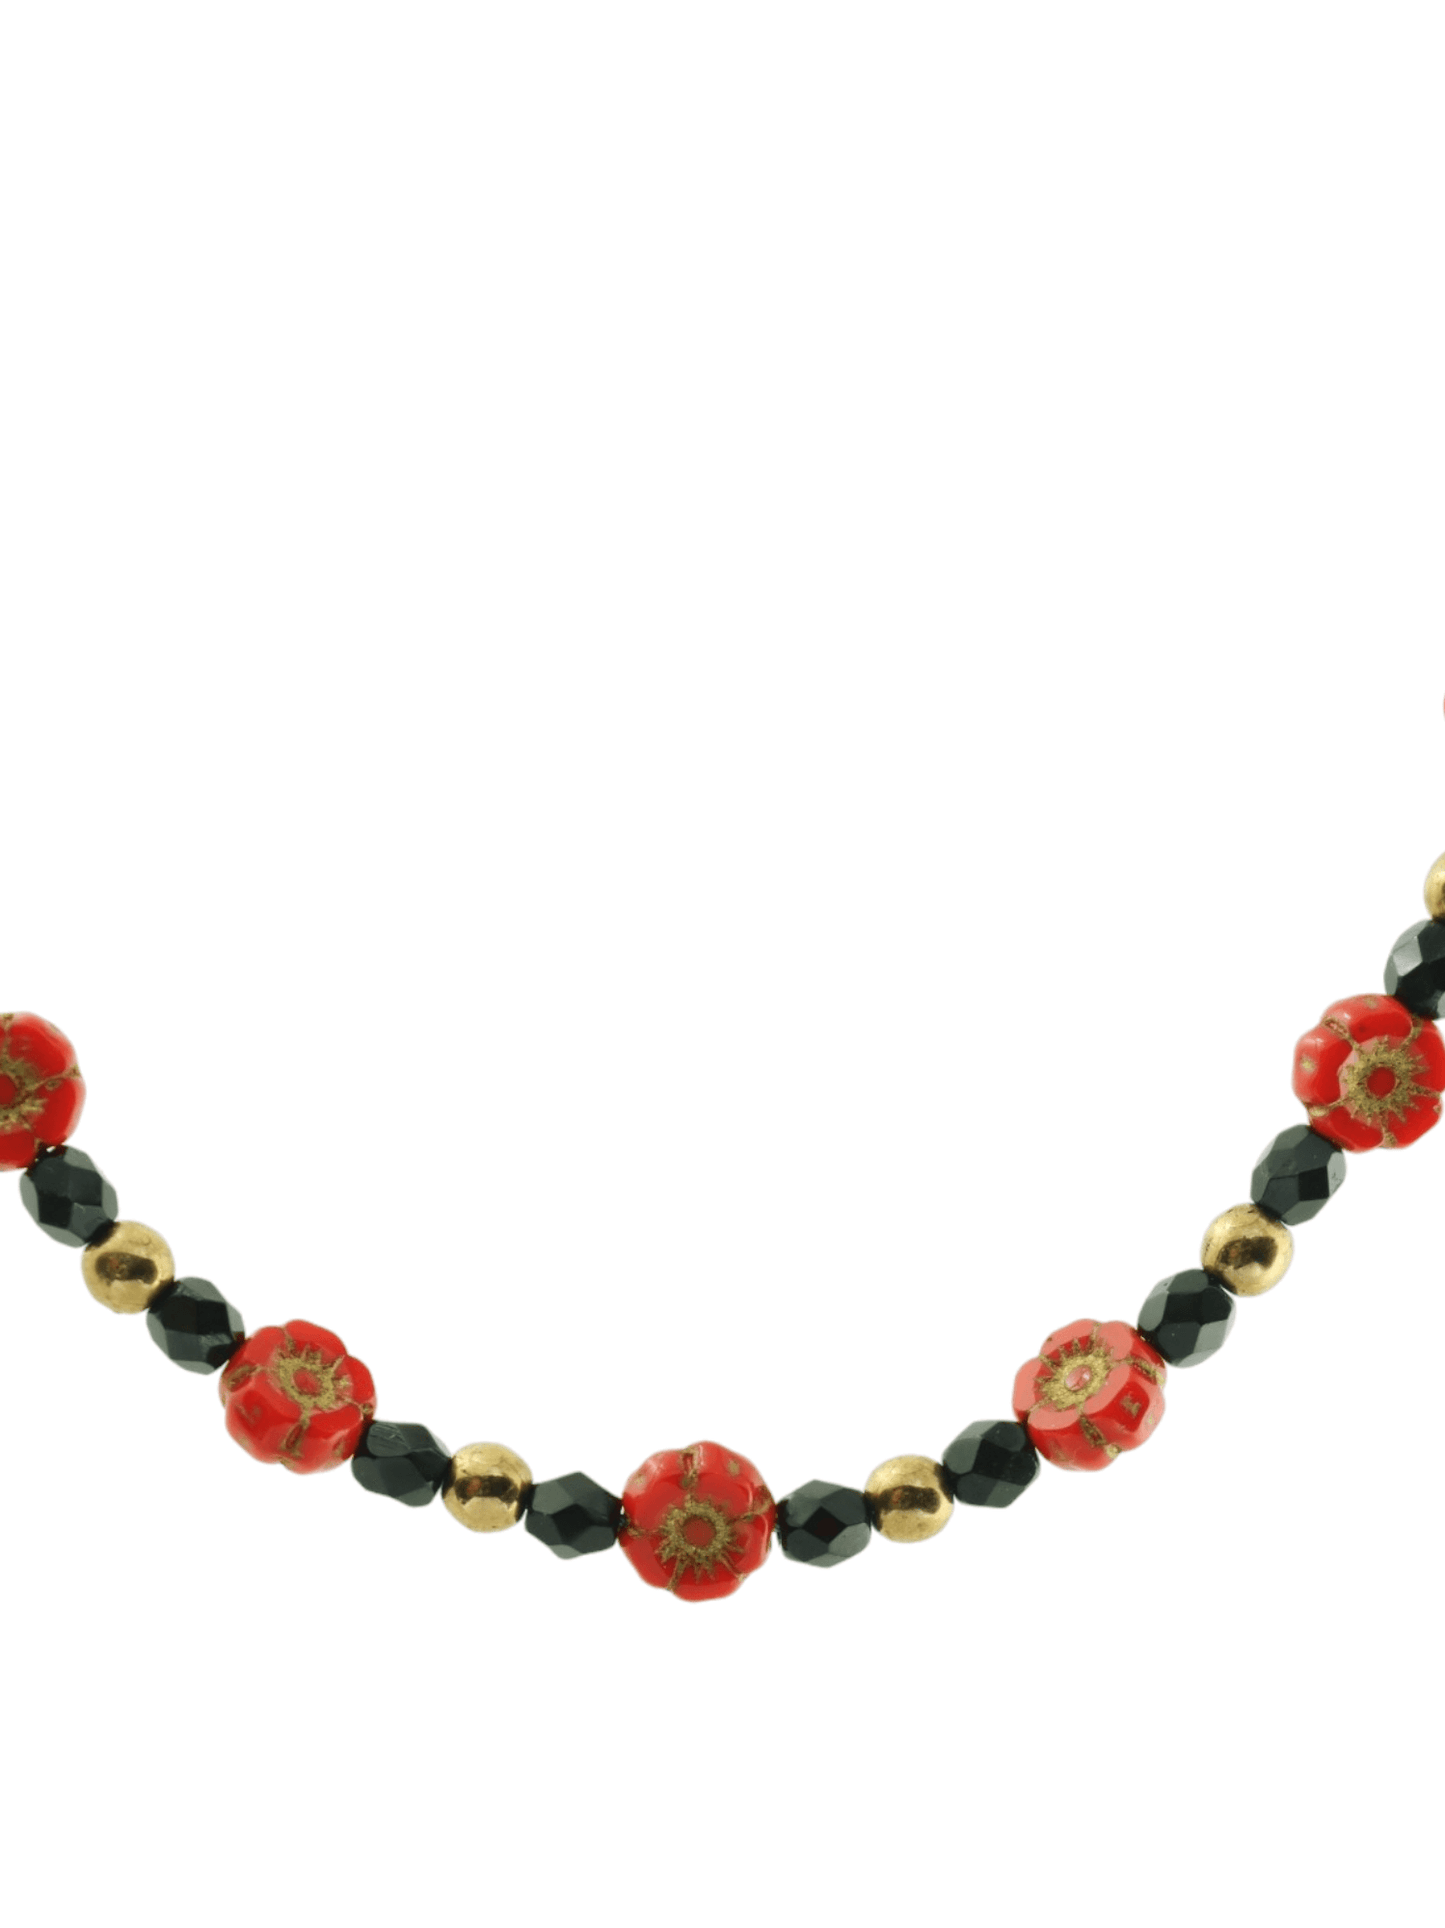 Tiny Red Flower Beaded Necklace - Delicate Everyday Necklace - Kaleidoscopes And Polka Dots